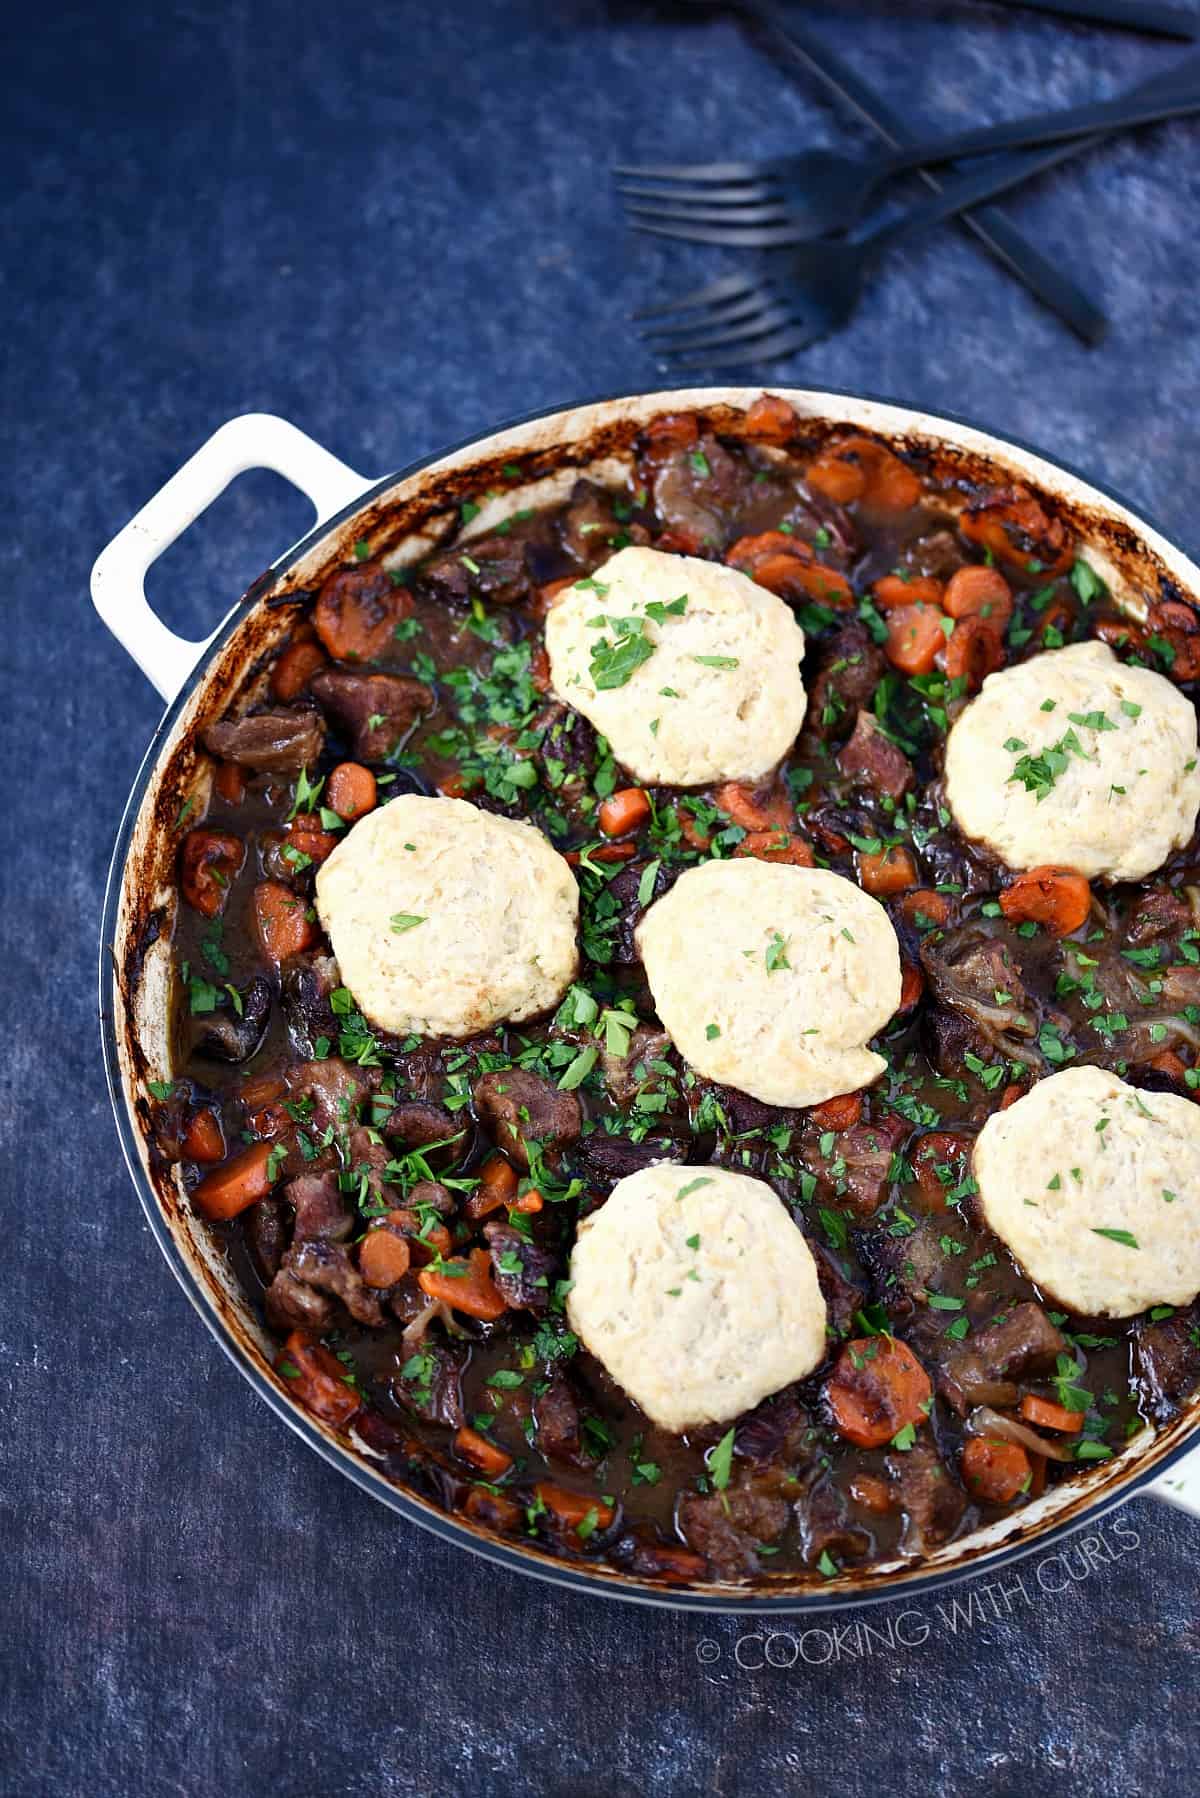 Looking down on a casserole pan filled with Guinness Beef, carrots and onions topped with Herb Dumplings.